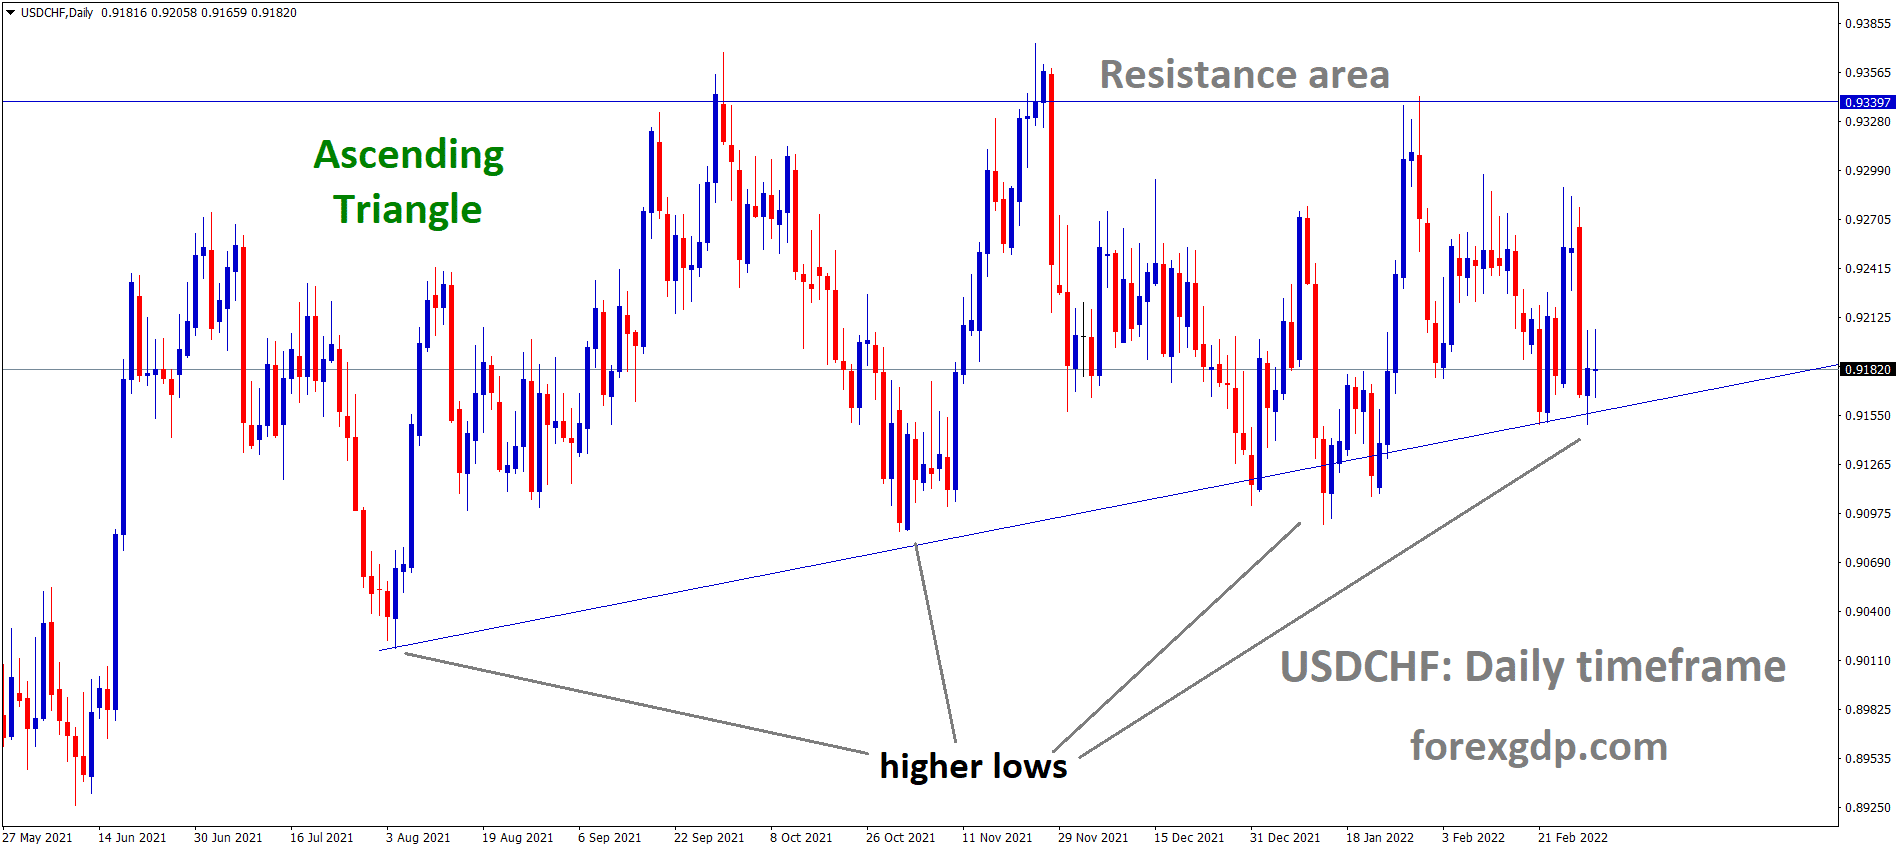 USDCHF is moving in an ascending triangle pattern and the market has rebounded from the higher low area of the pattern. 1